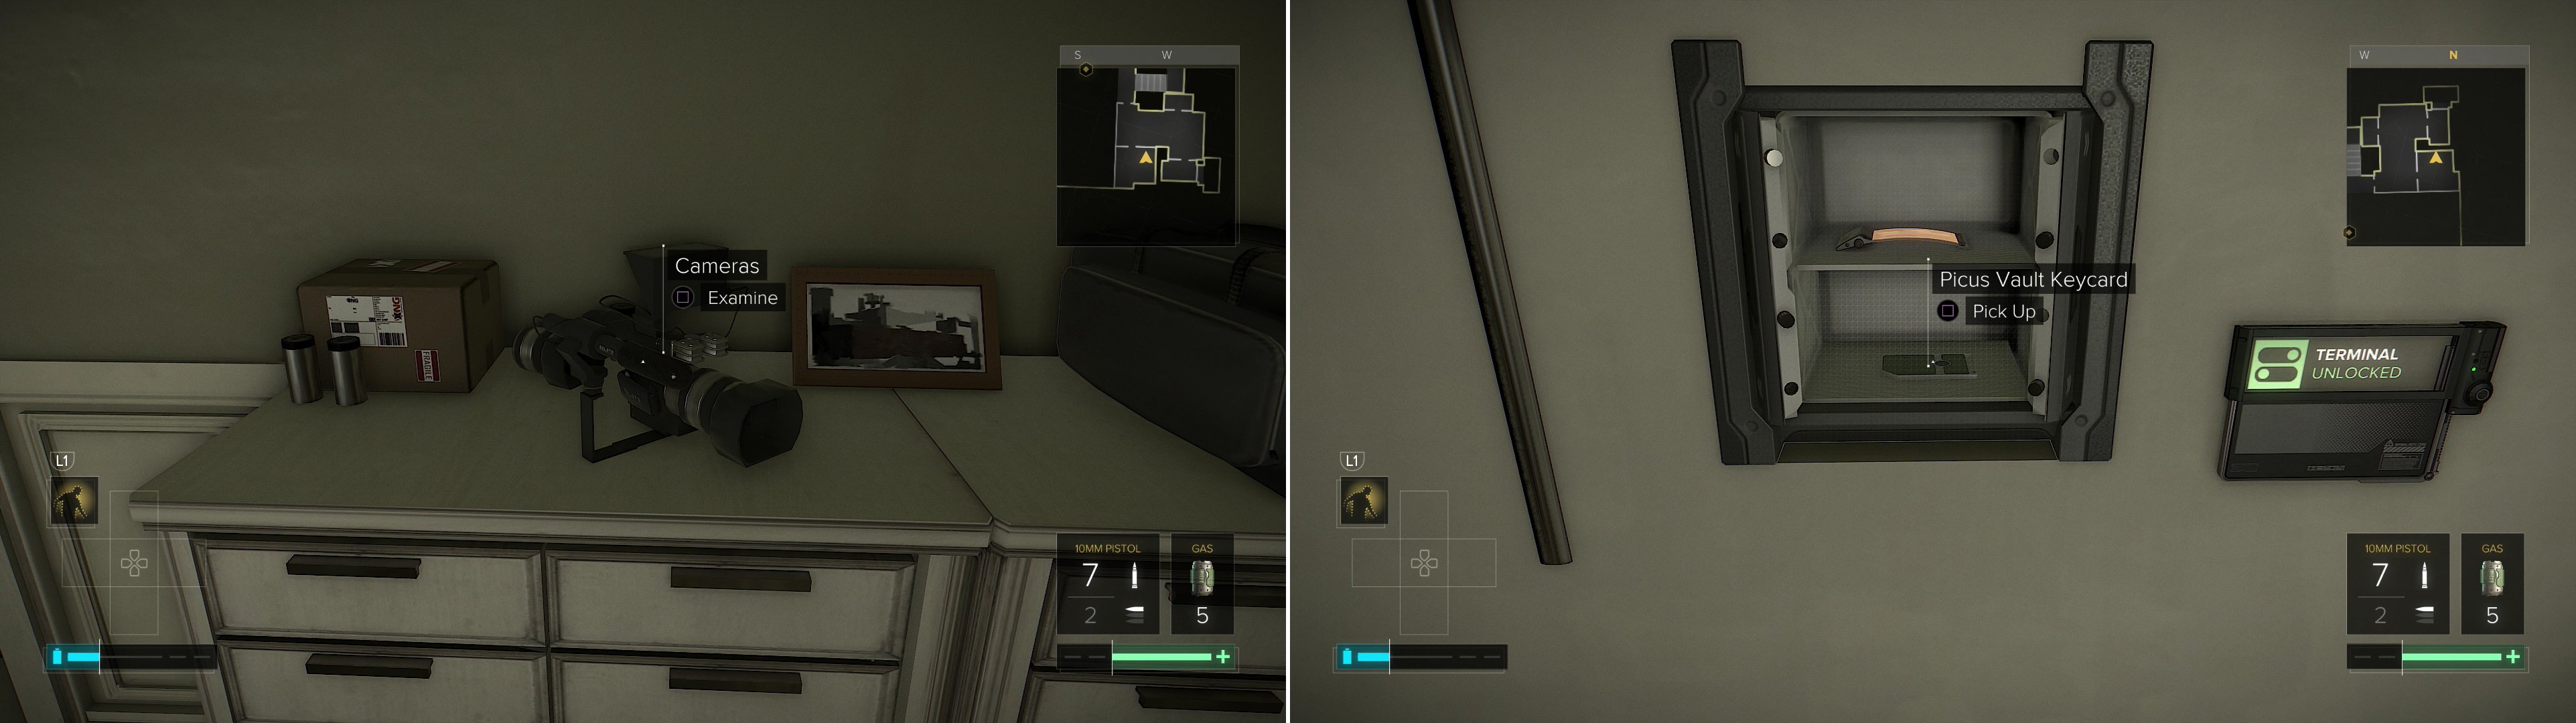 Examine a Camera (left) to reveal a safe containing the Picus Vault Keycard (right).